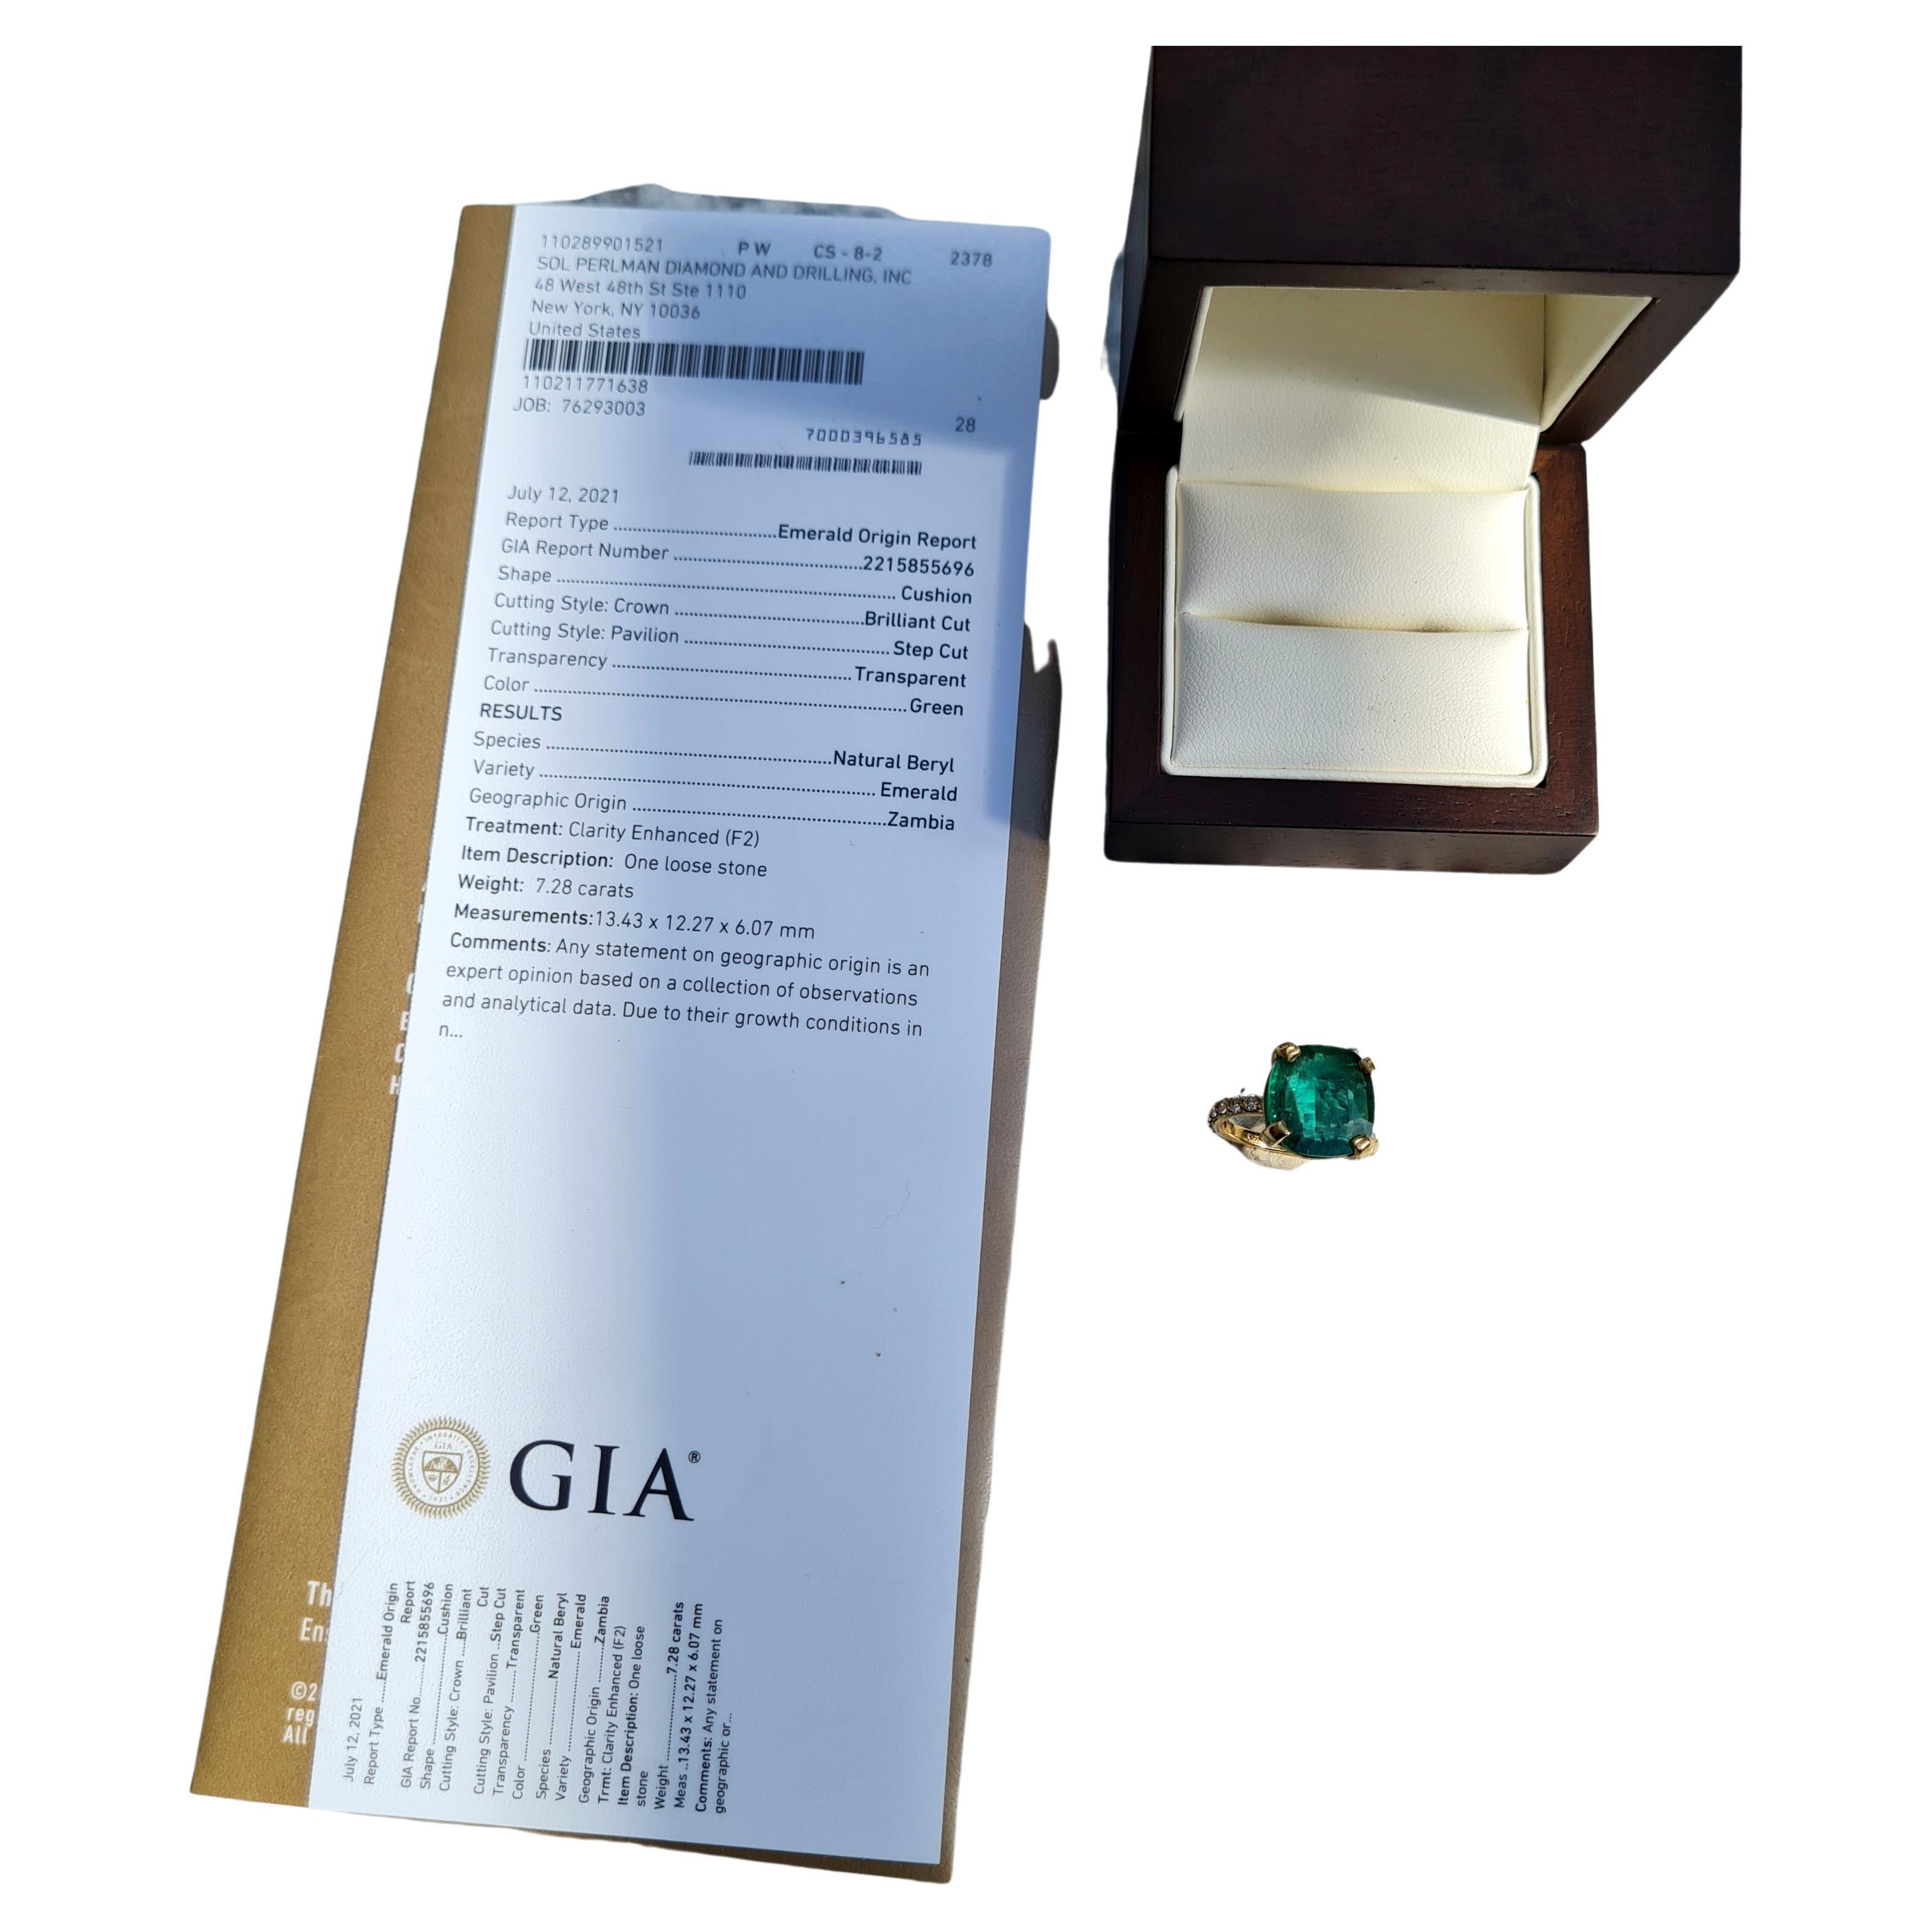 GIA CERTIFIED 7.28 CT Zambian. Measures 13.43 x 12.27 x 6.07 mm. Very bold and rich cushion ring. The ring is solid 14k yellow gold and has diamond accents. This ring exhibits prominence and simplicity at the same time. 